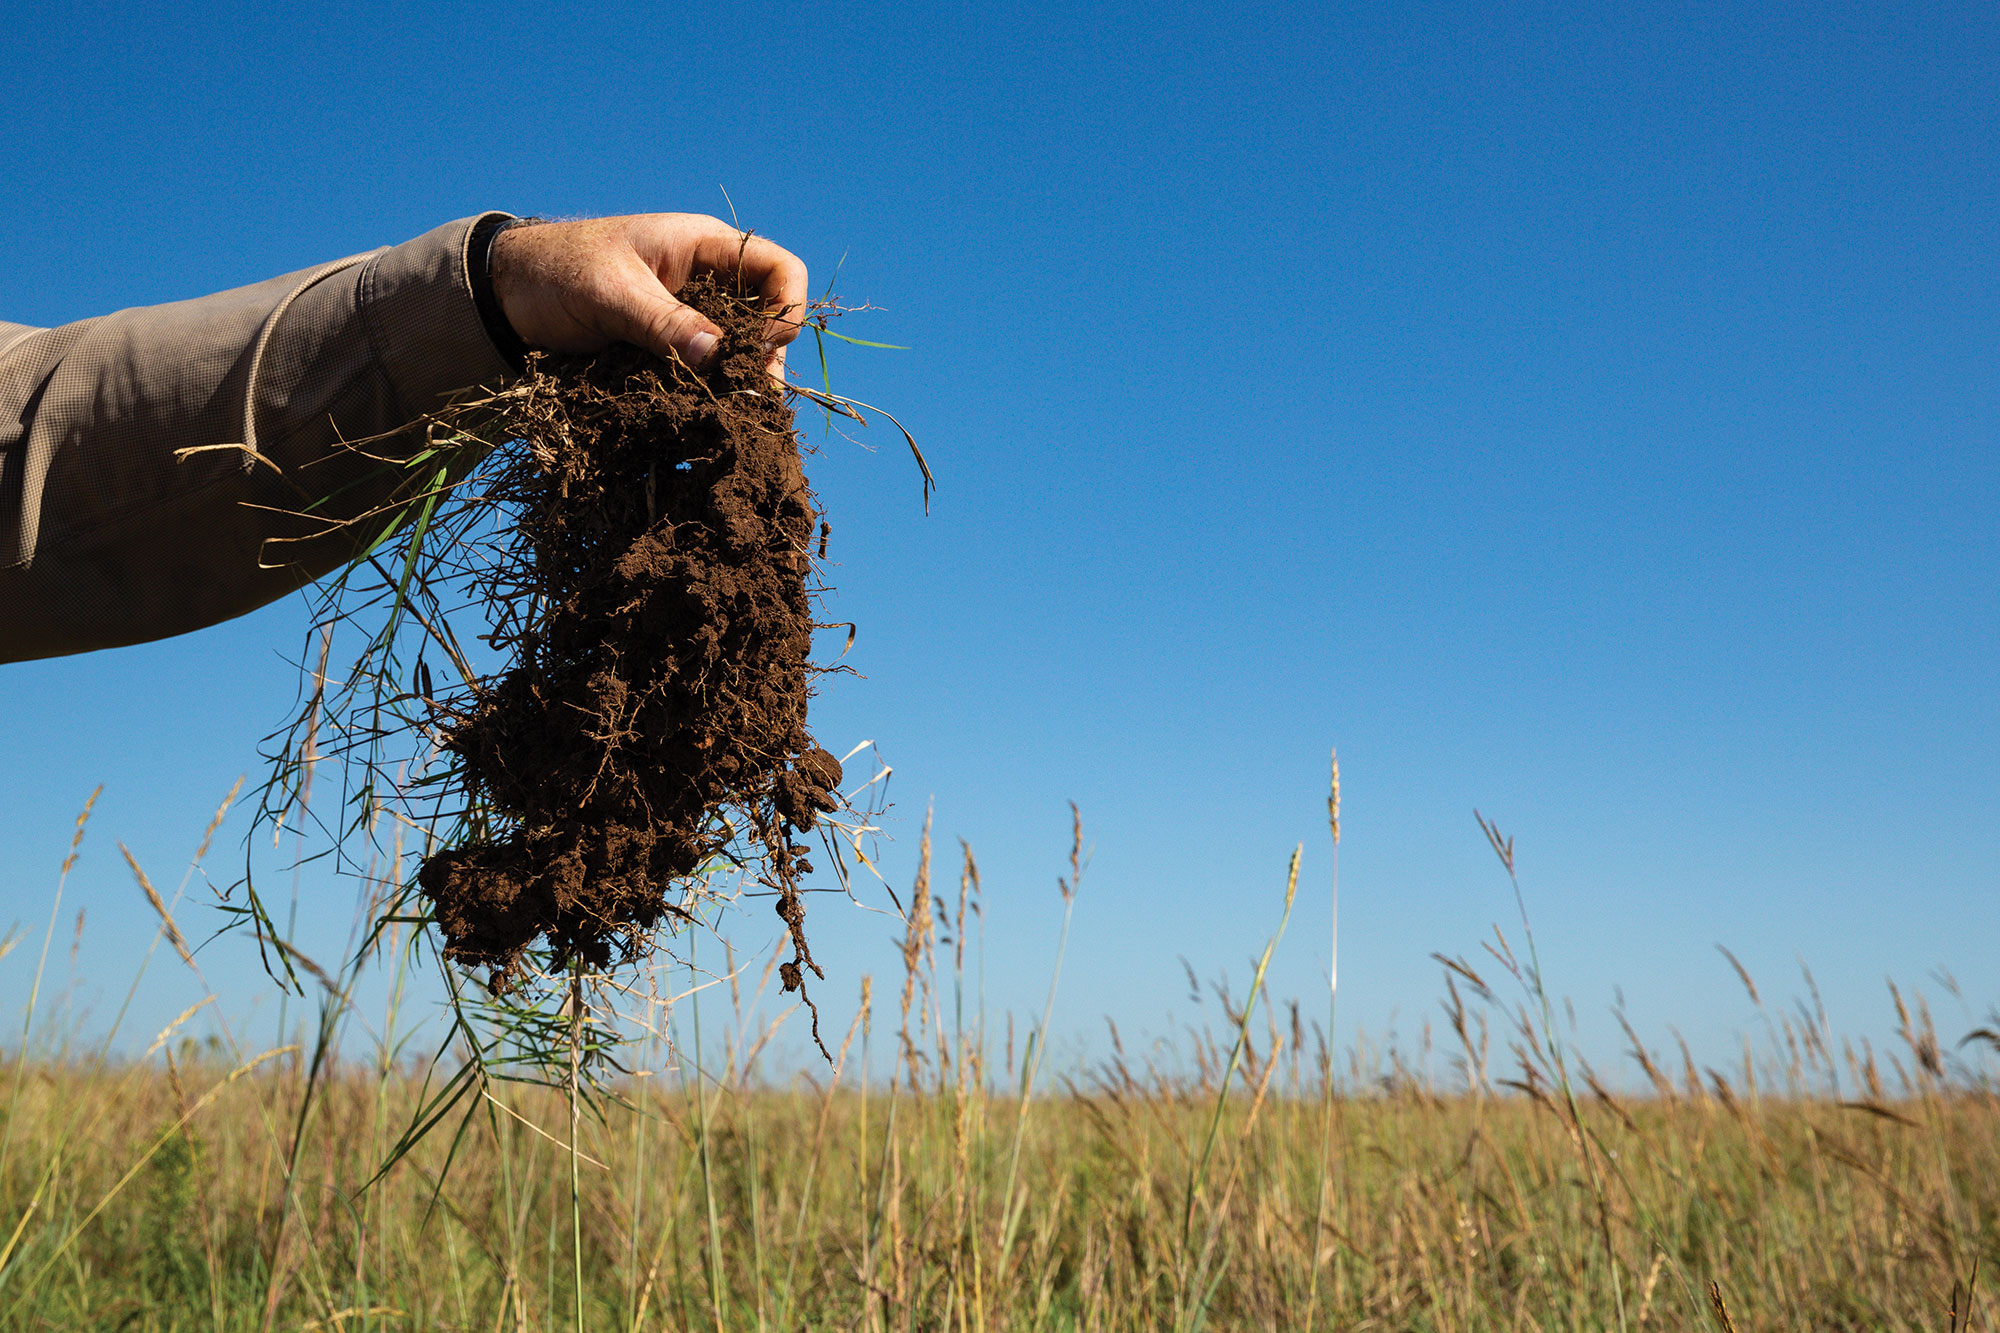 Healthy soil plays host to a range of microbial creatures that promote plant growth and benefit the overall ecosystem, which includes people and their environments.